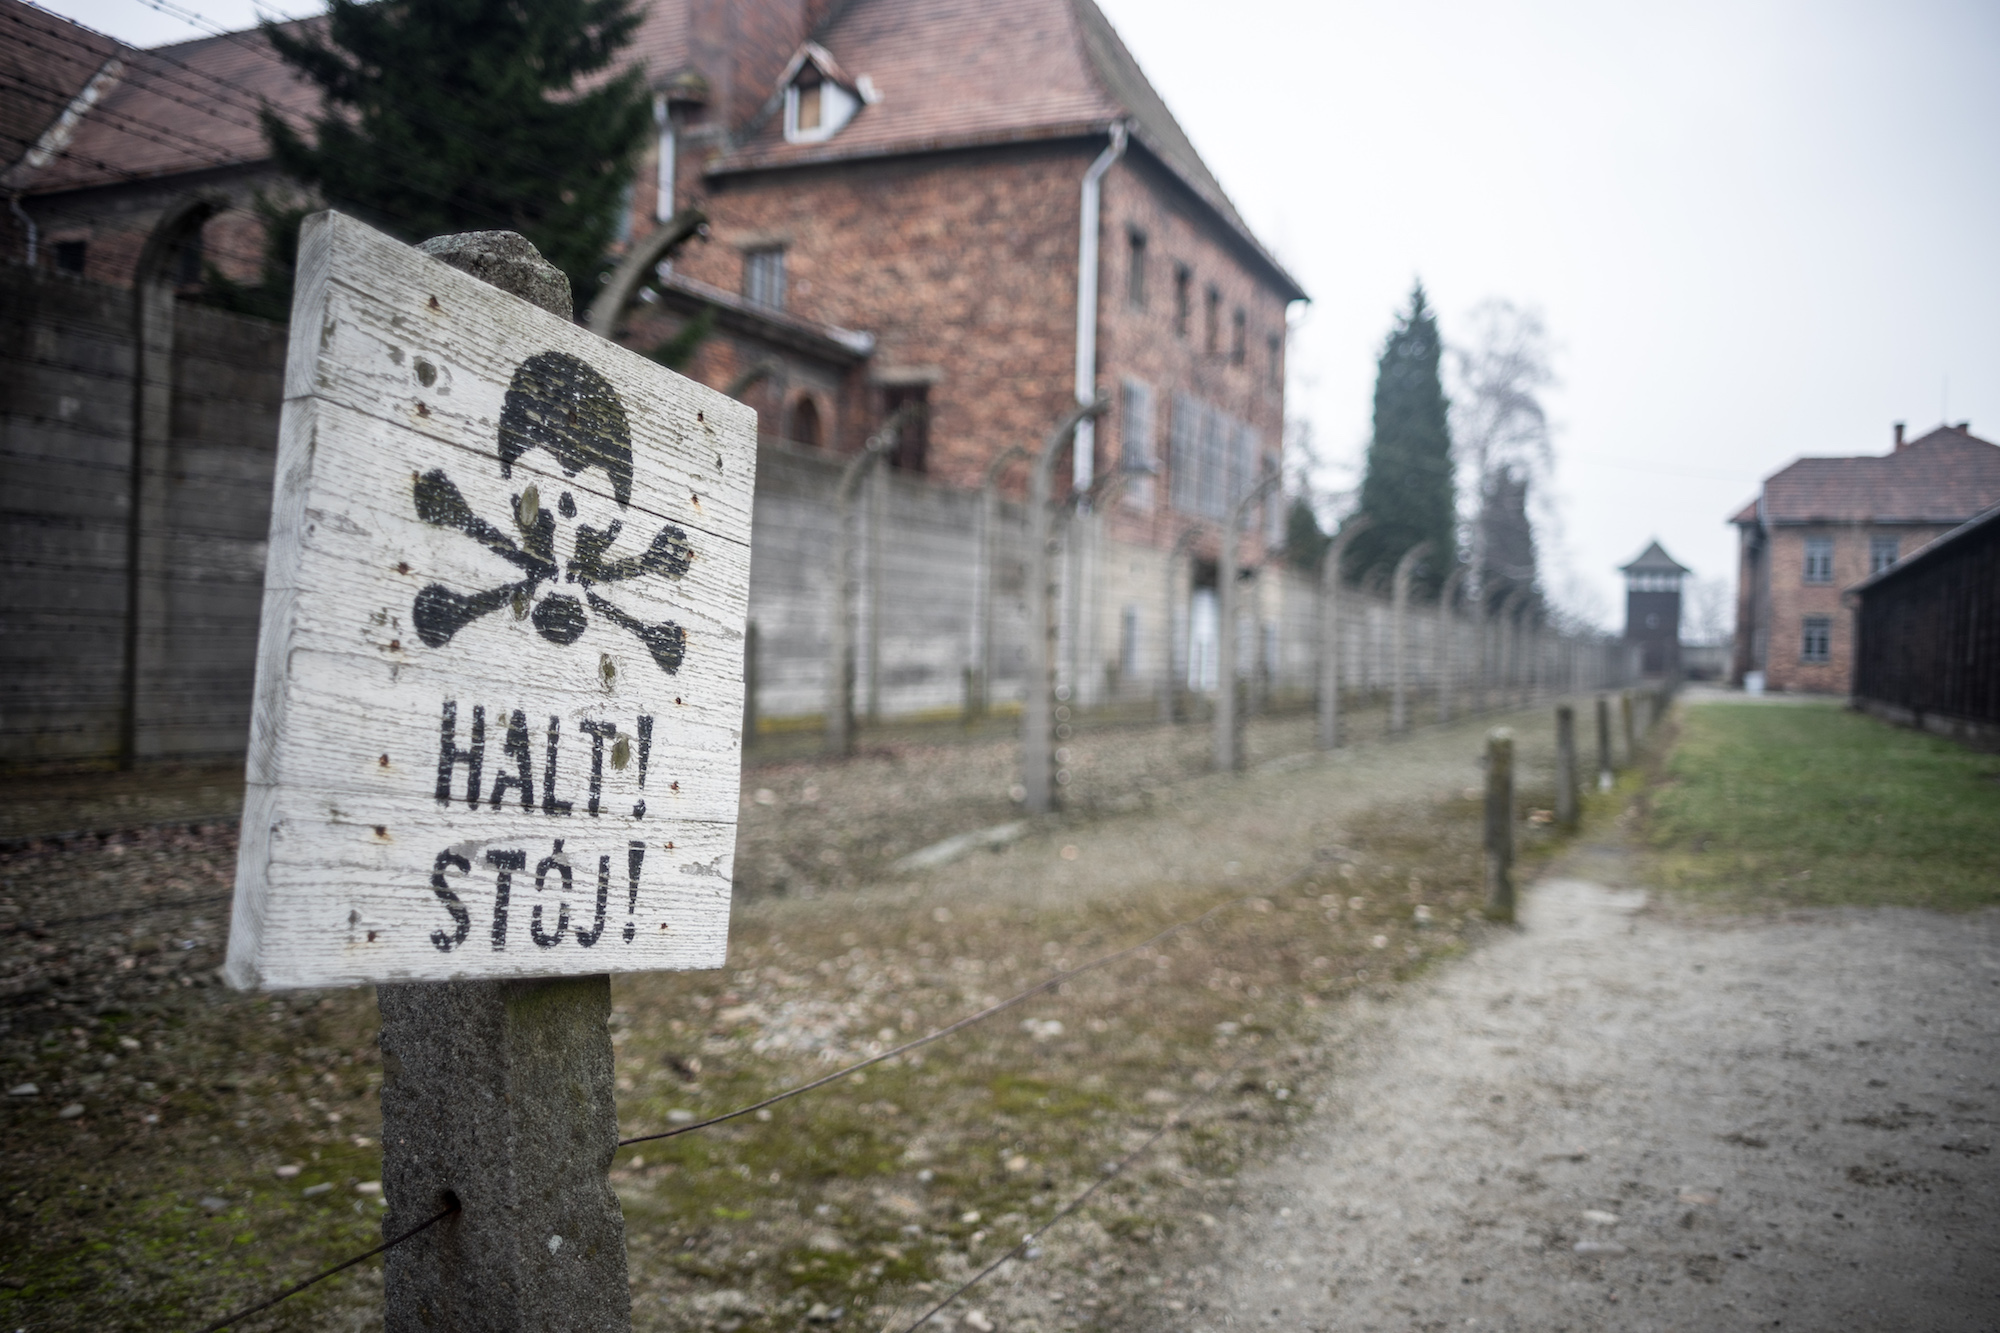 A stop sign in Auschwitz concentration camp, Fabrizio Sciami, Flickr